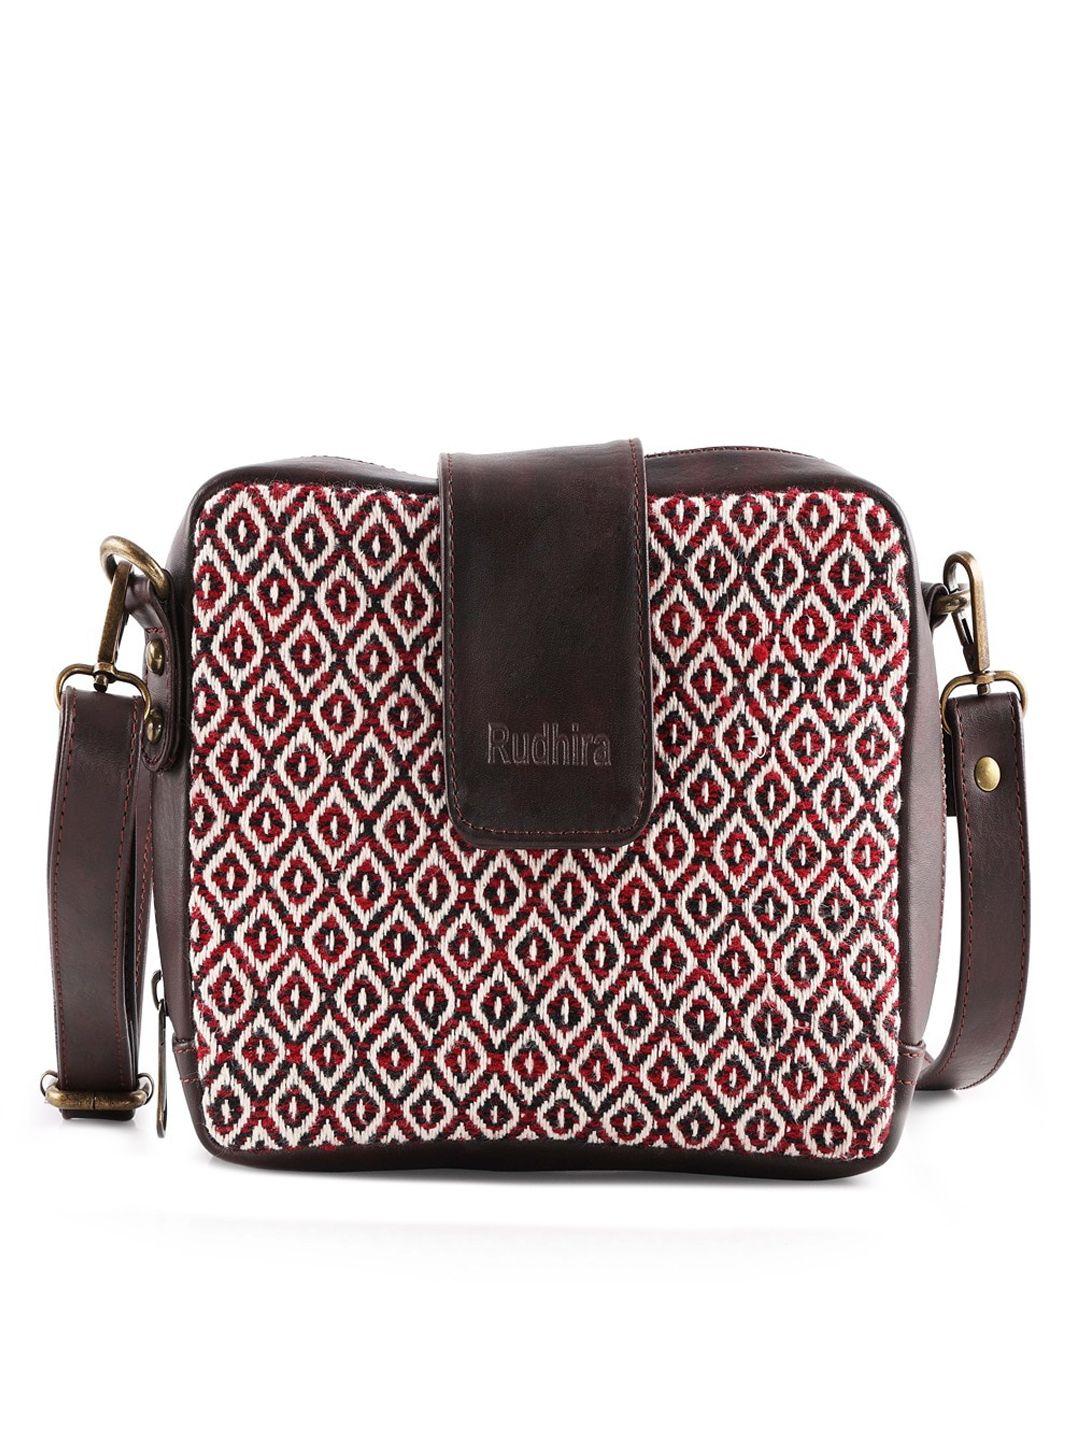 rudhira geometric leather structured sling bag